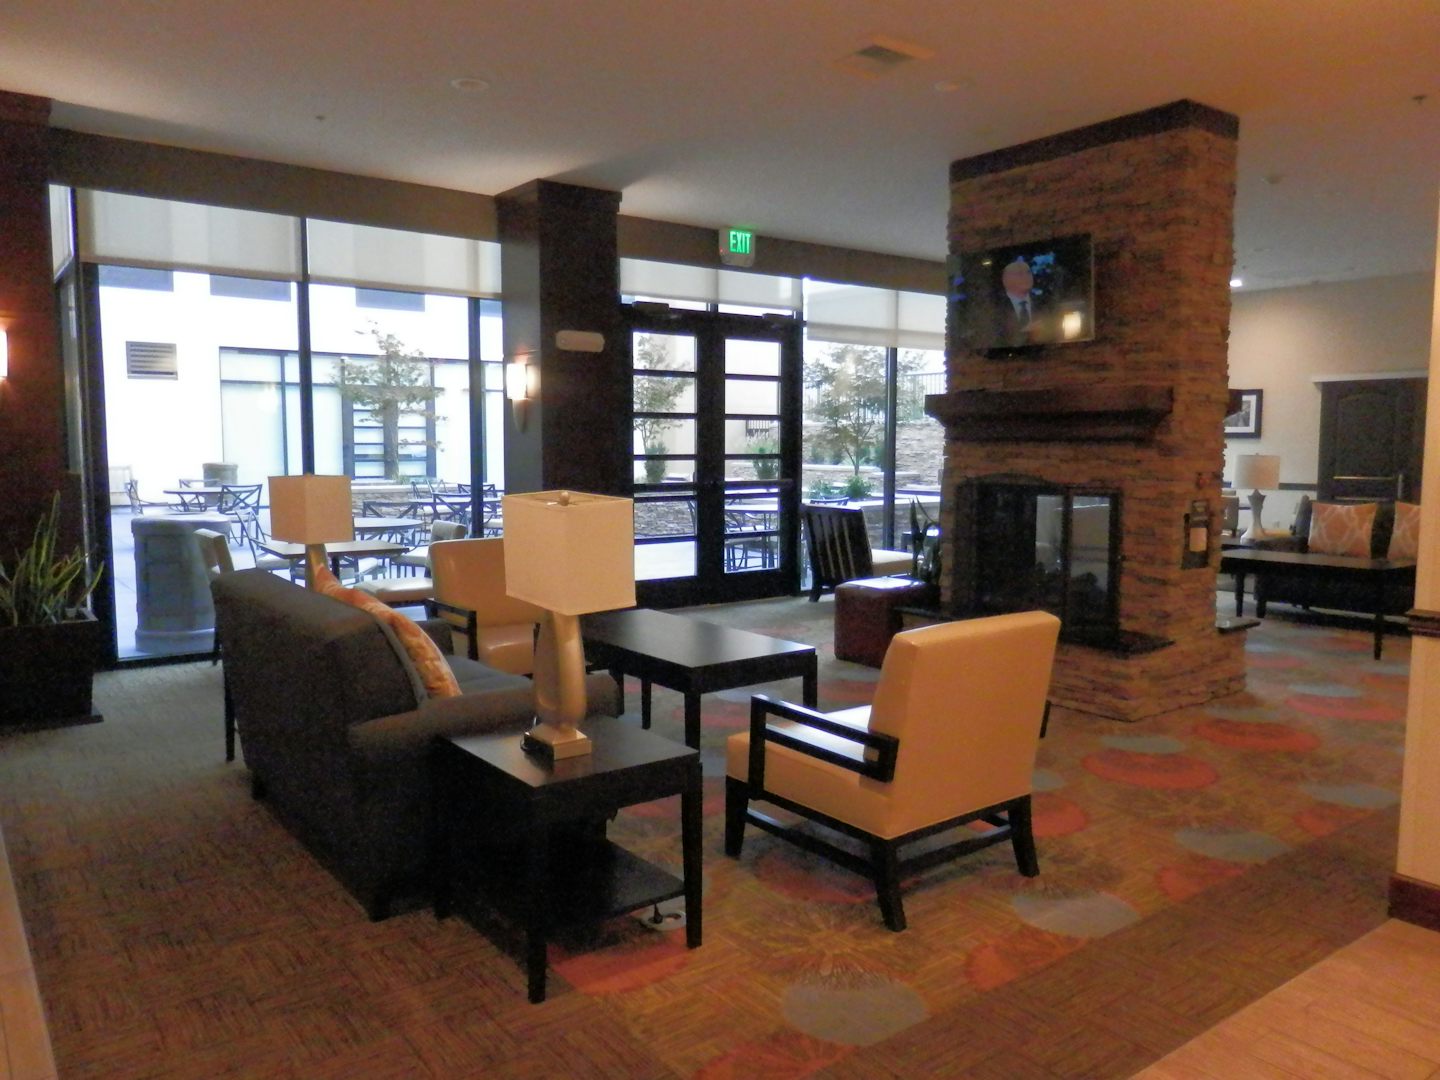 Staybridge suites living space with movie room in background